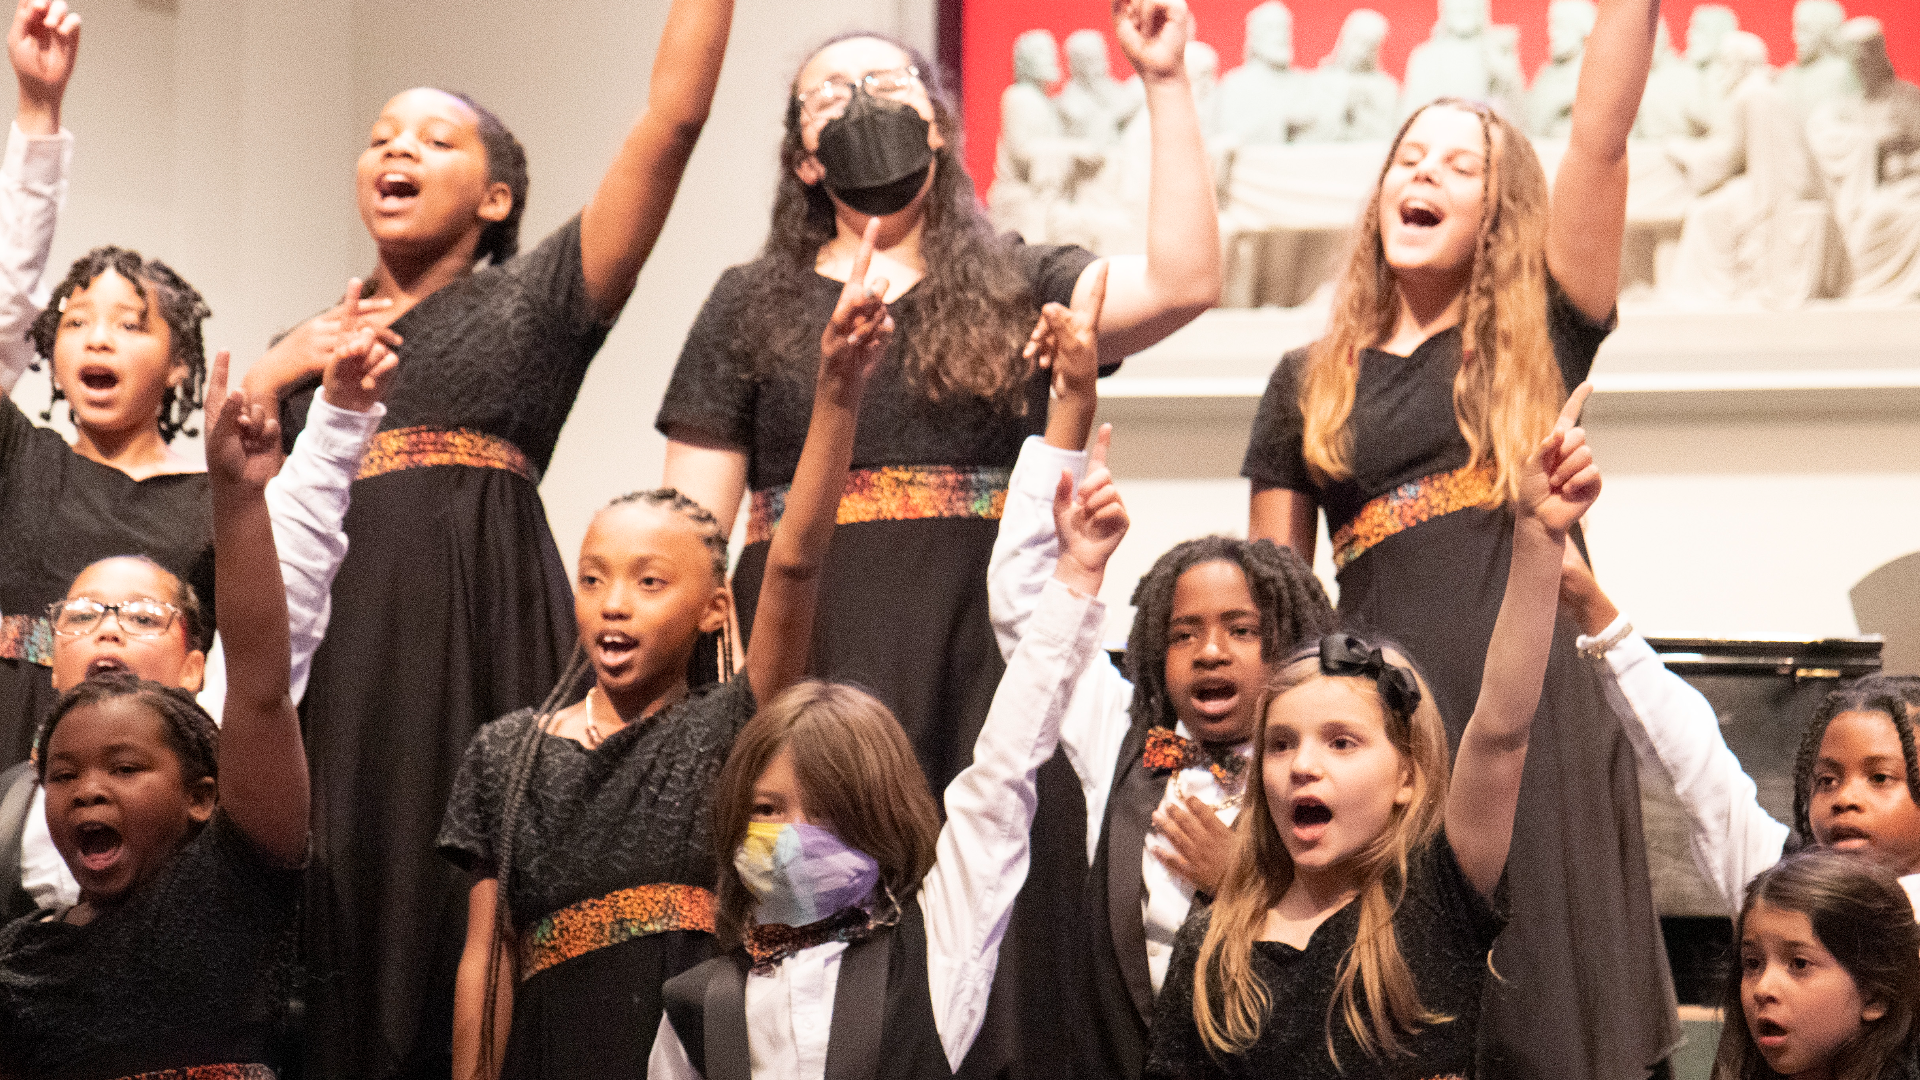 The Seattle Children's Chorus developed "LIFTED!" as way to create more opportunities for young singers south of downtown Seattle. #k5evening